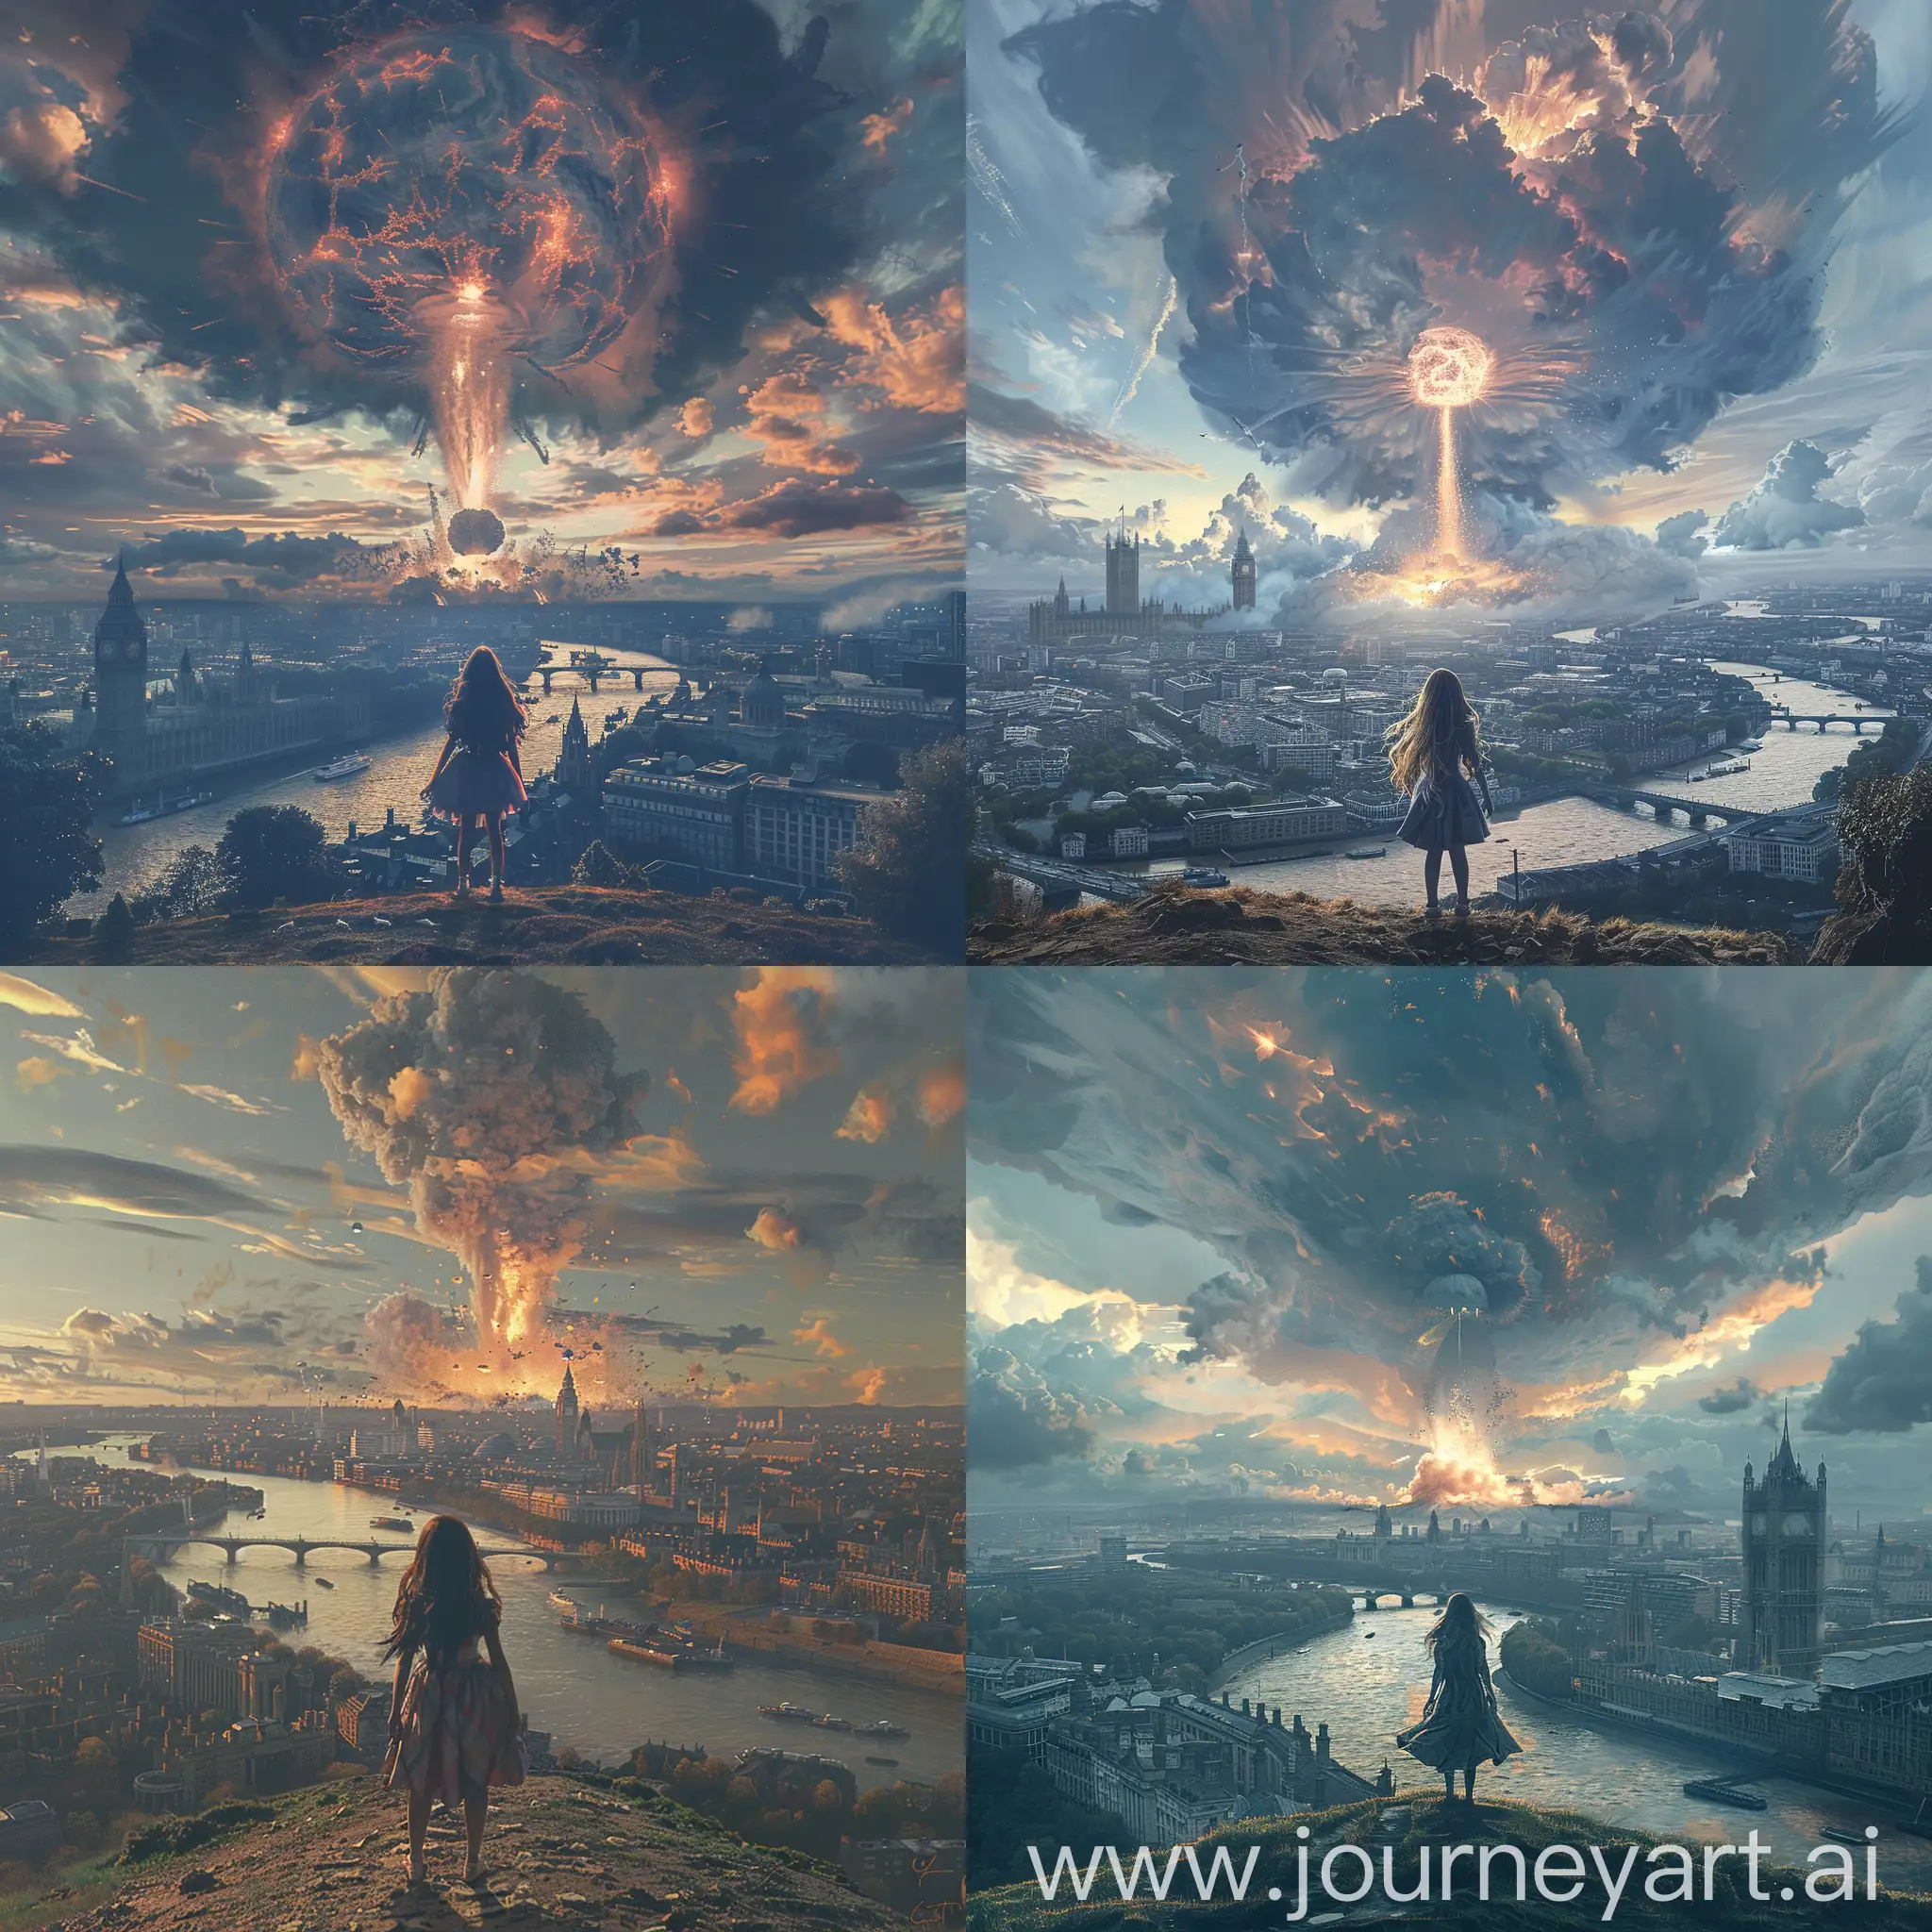 A highly detailed dystopian image of beautiful distressed girl standing on a hill looking over London where a nuclear bomb has exploded and there is a mushroom cloud in the sky. Beautiful magical mysterious fantasy surreal futuristic disturbing